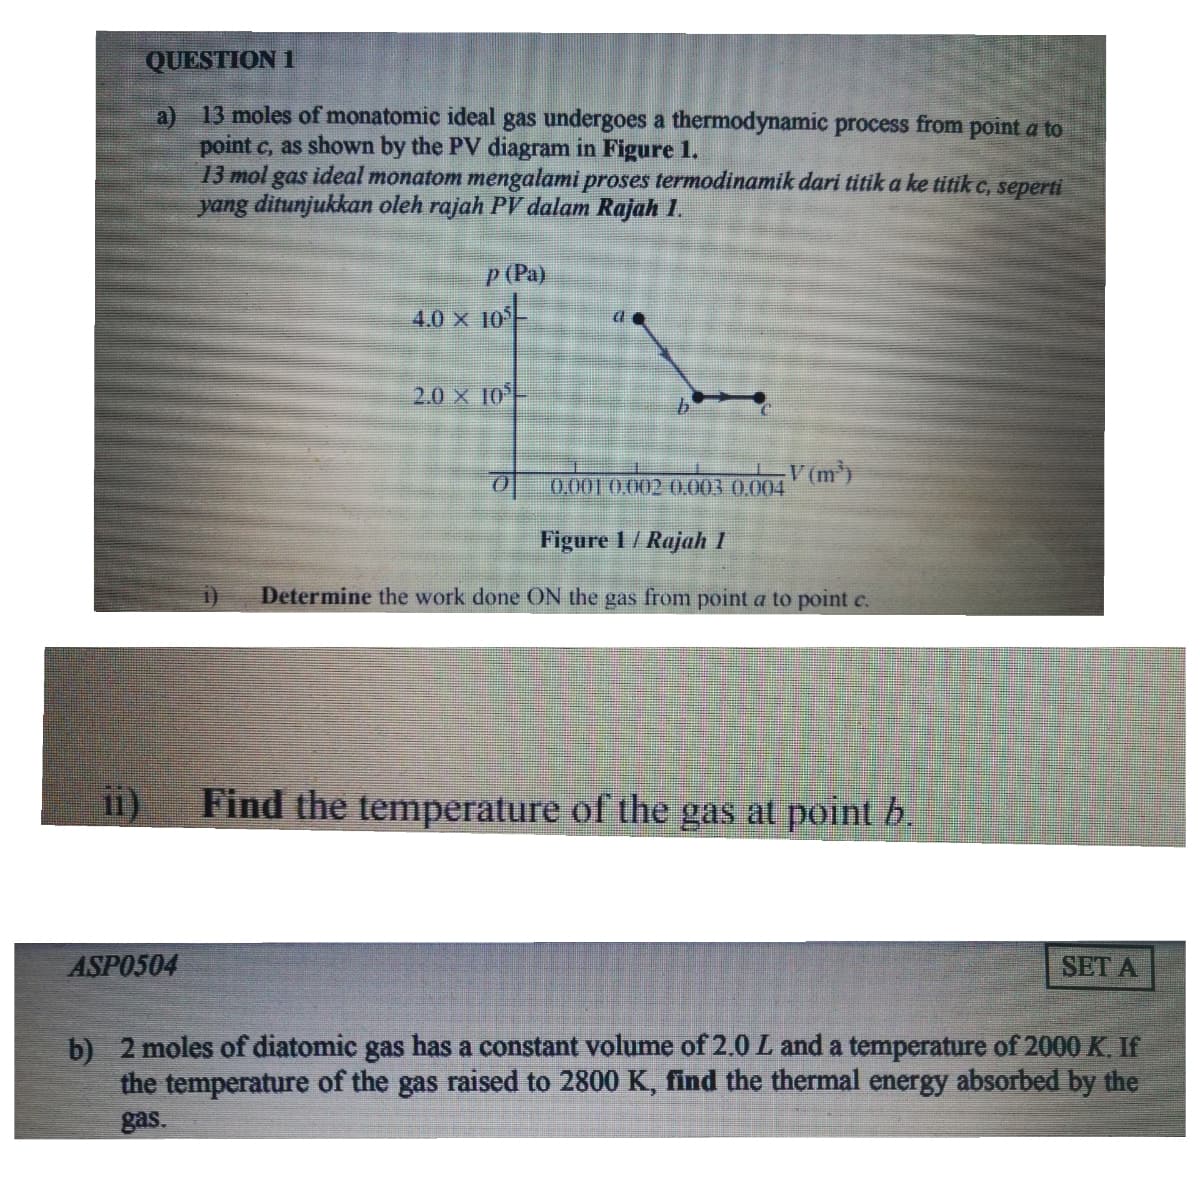 QUESTION 1
13 moles of monatomic ideal gas undergoes a thermodynamic process from point a to
a)
point c, as shown by the PV diagram in Figure 1.
13 mol gas ideal monatom mengalami proses termodinamik dari titik a ke titik c, seperti
yang ditunjukkan oleh rajah PV dalam Rajah 1.
P (Pa)
4.0 x 10
2.0 X 10
V (m)
0.001 0,002 0.003 0.004
Figure 1/ Rajah 1
Determine the work done ON the gas from point a to point c.
Find the temperature of the gas at point b.
i1)
ASPO504
SET A
b) 2 moles of diatomic gas has a constant volume of 2.0 L and a temperature of 2000 K. If
the temperature of the gas raised to 2800 K, find the thermal energy absorbed by the
gas.
